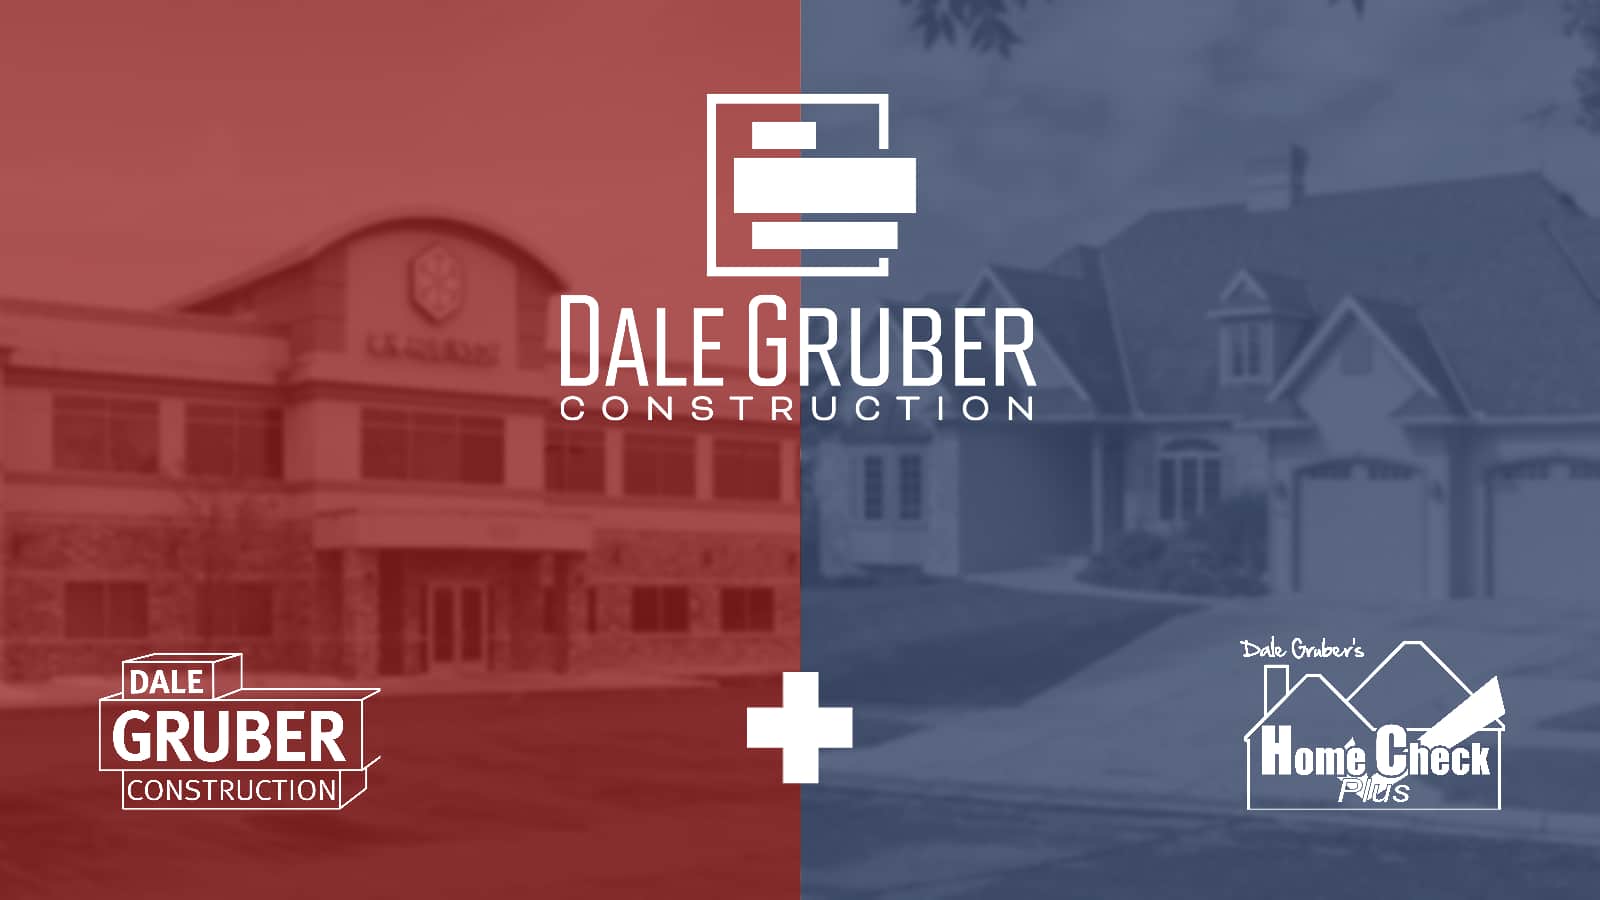 Announcing Dale Gruber Construction & Home Check Plus Merger!